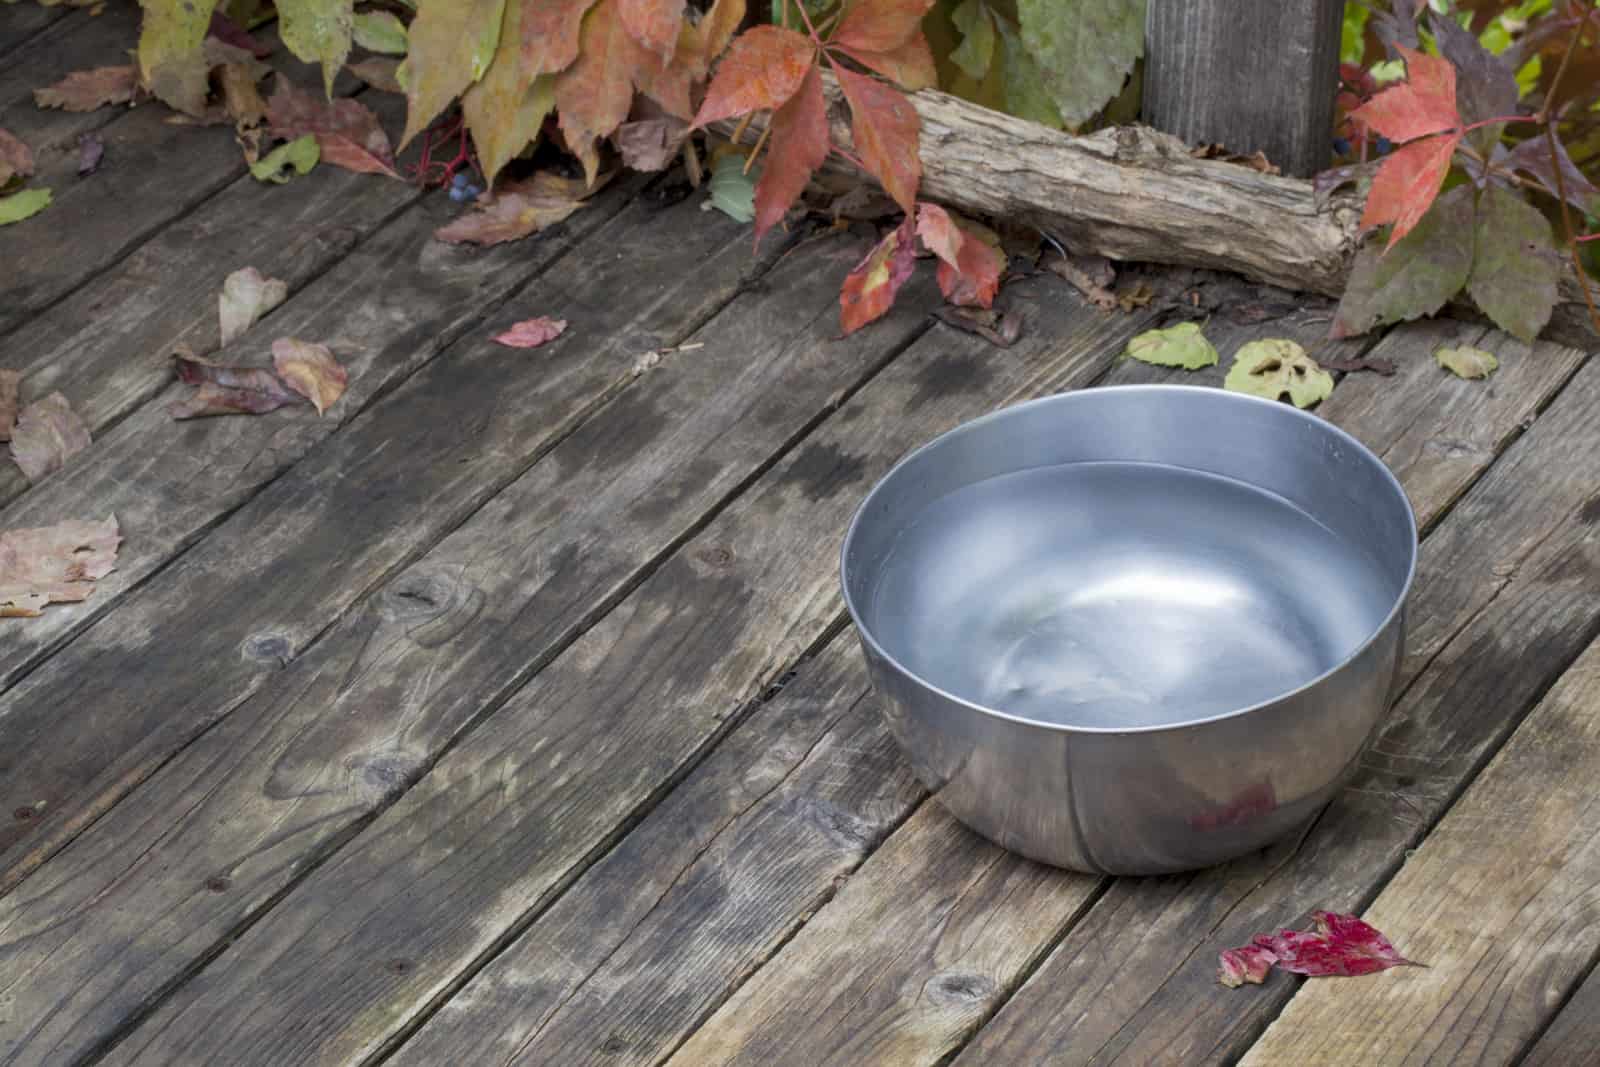 metal water bowl for a dog on wooden deck with vine foliage